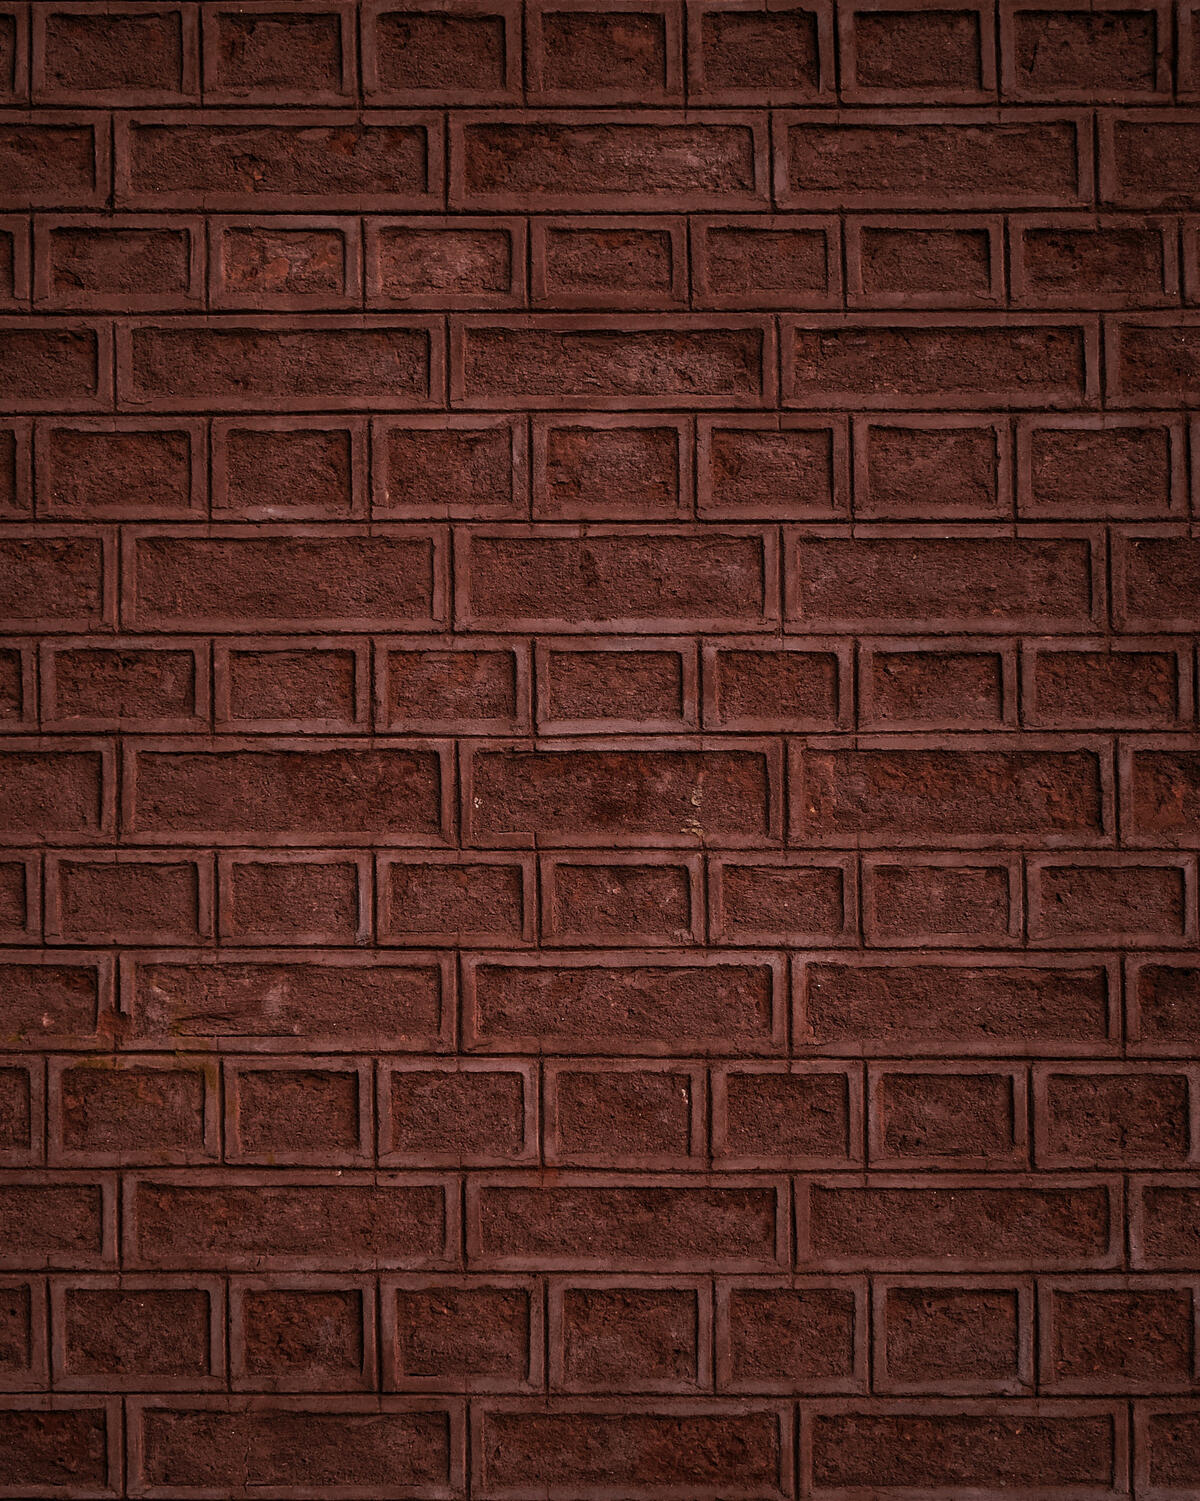 The brick wall is red in color